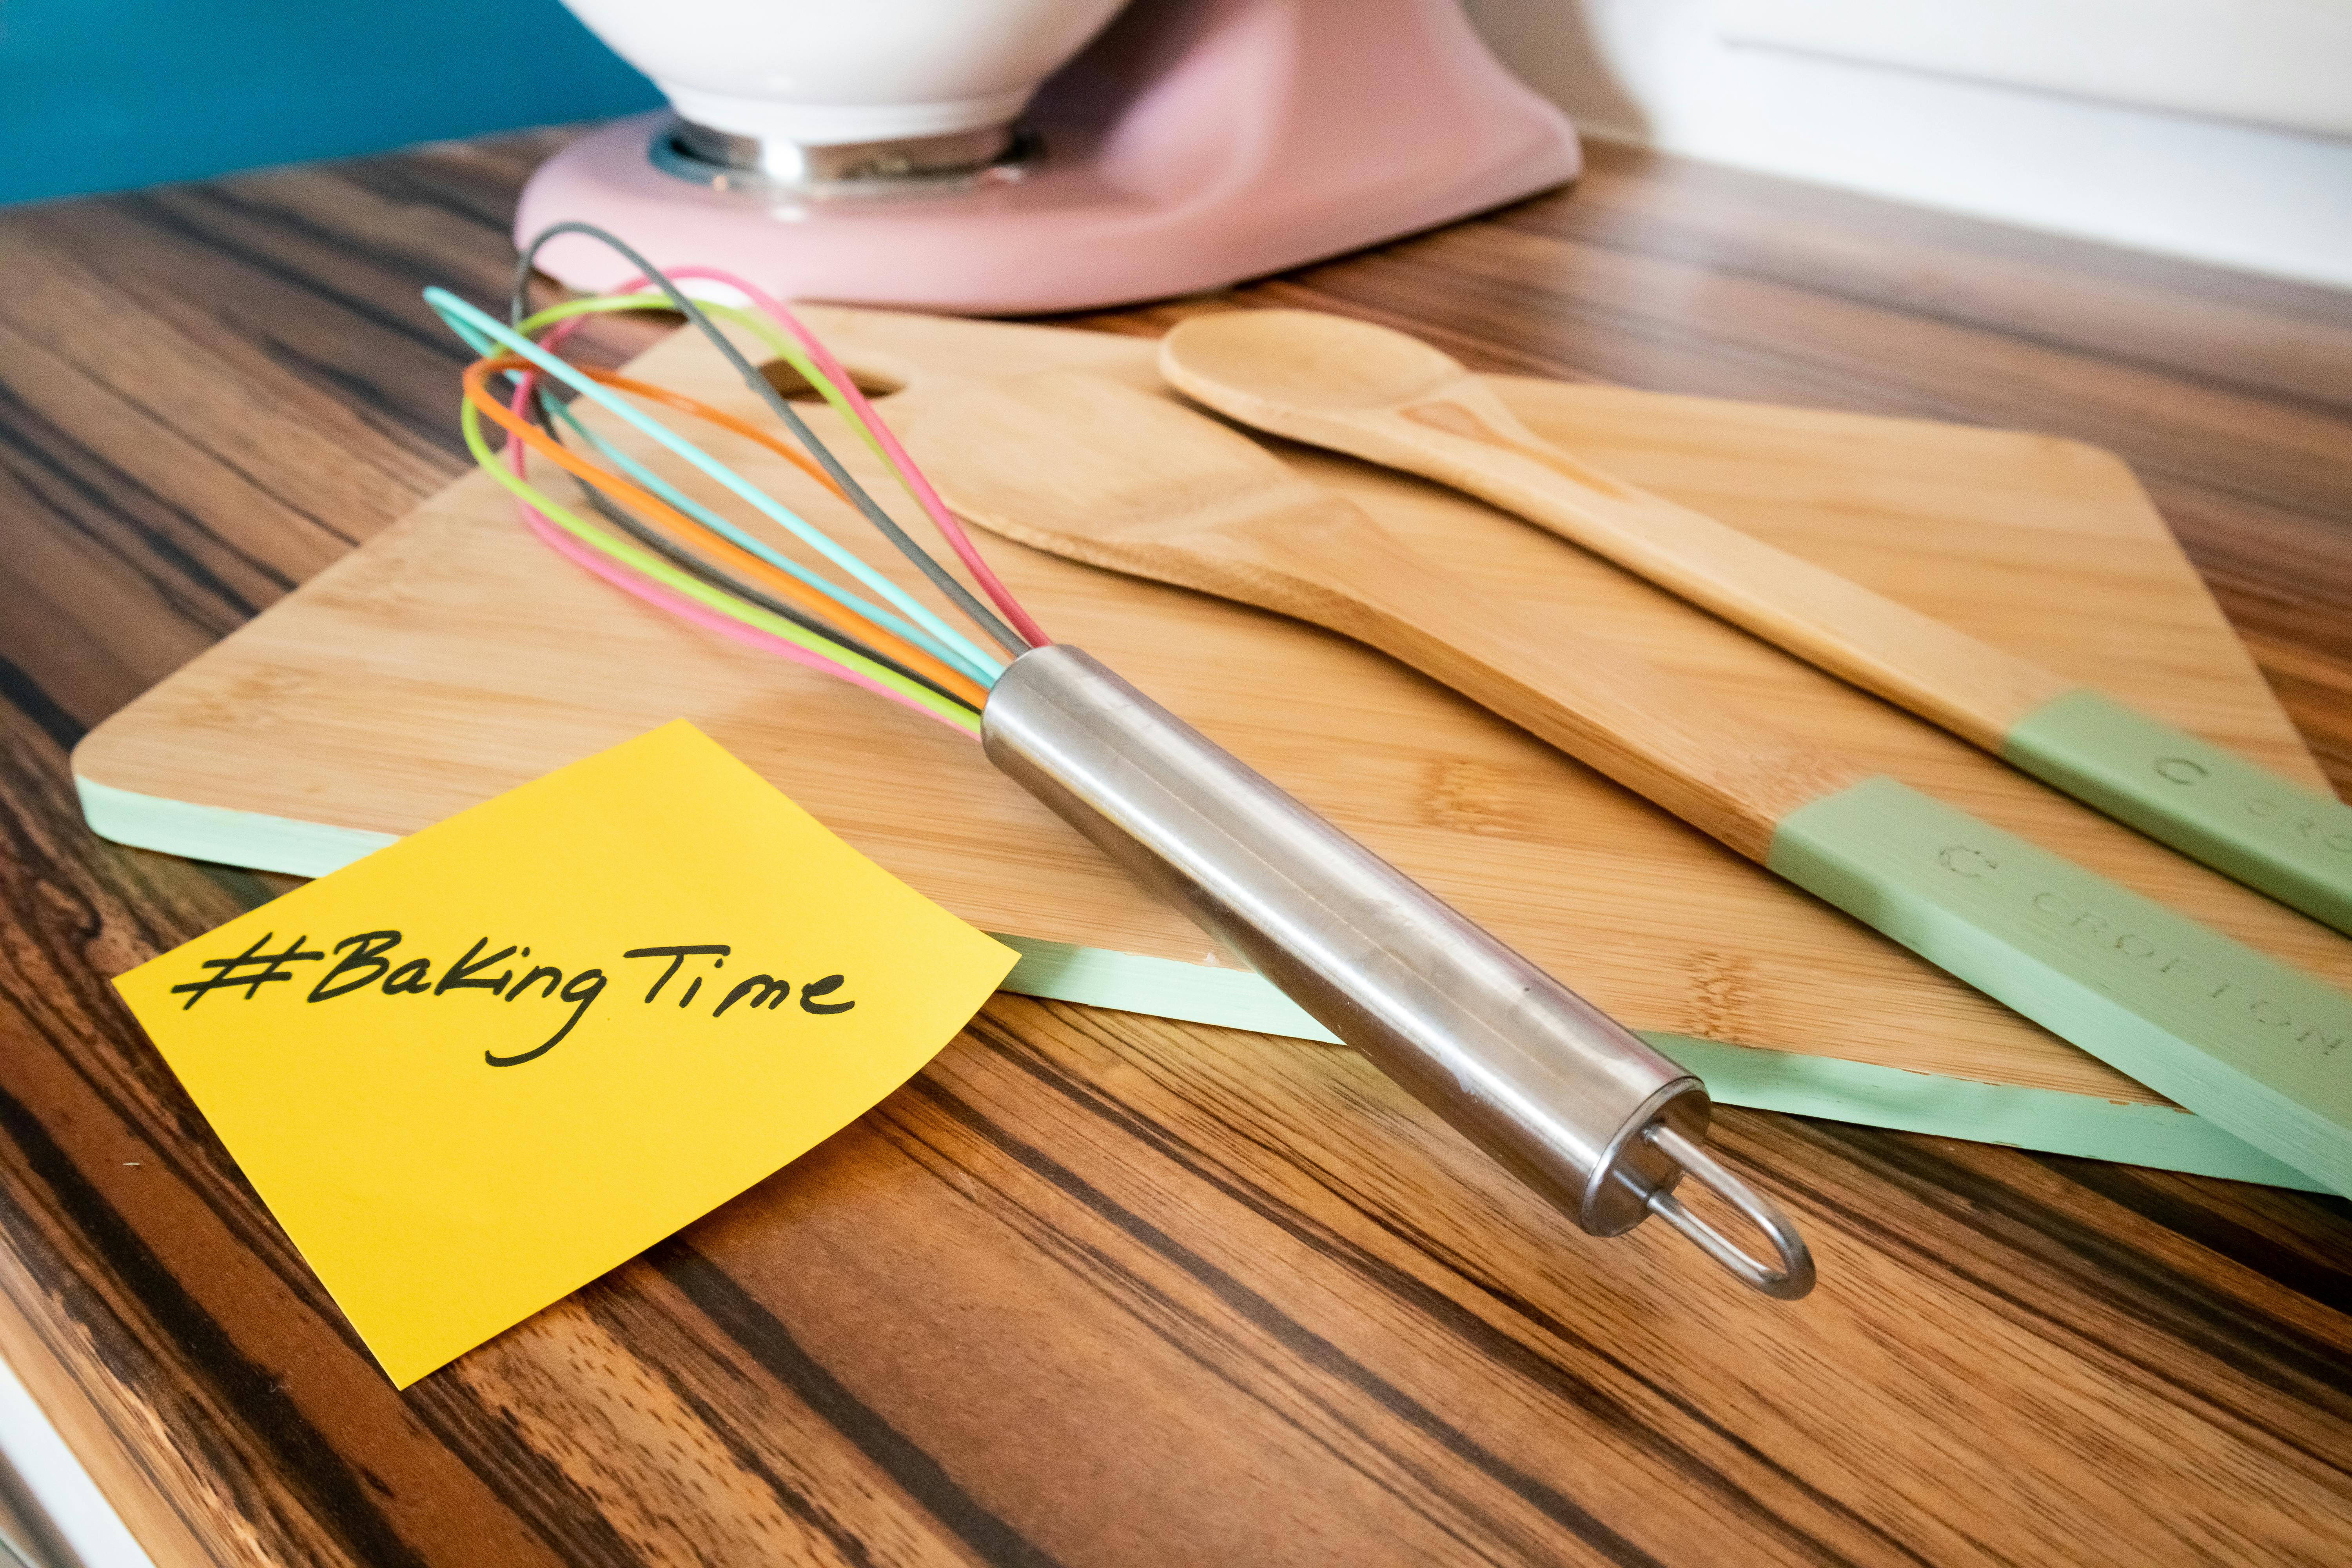 Time Management Coaching